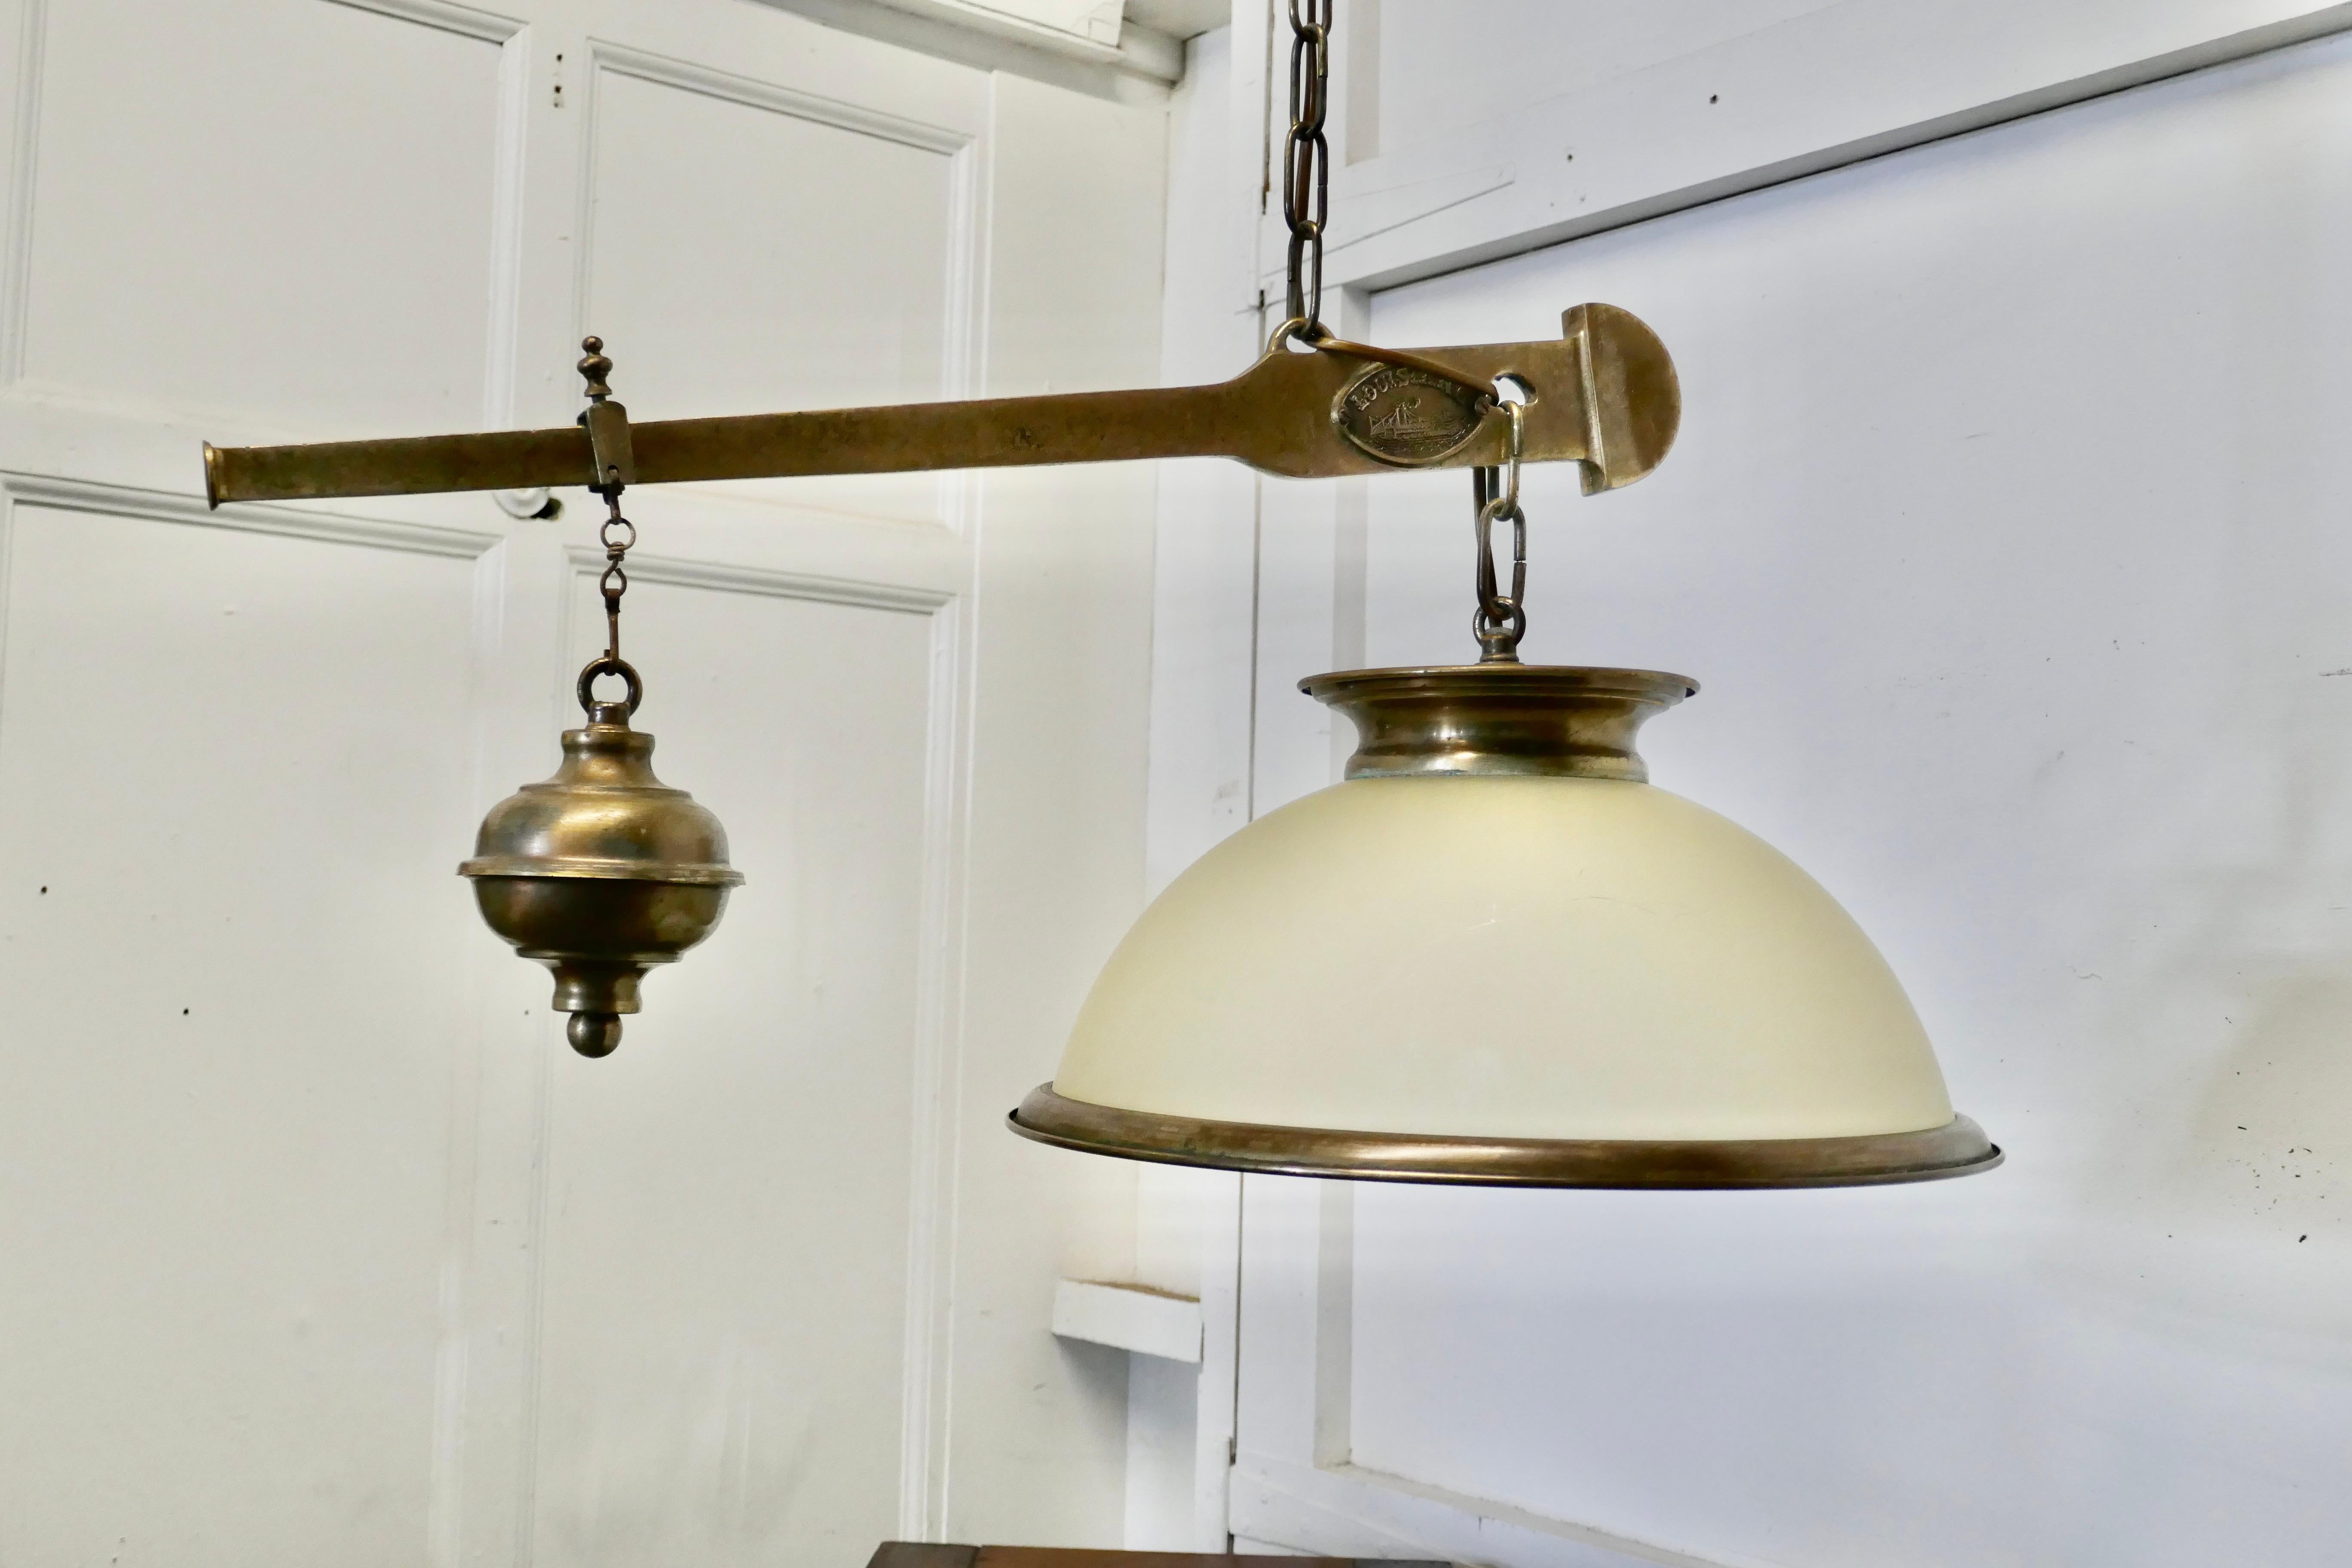 20th Century Large Steelyard Brass Scale Lamp from a Hardware Store